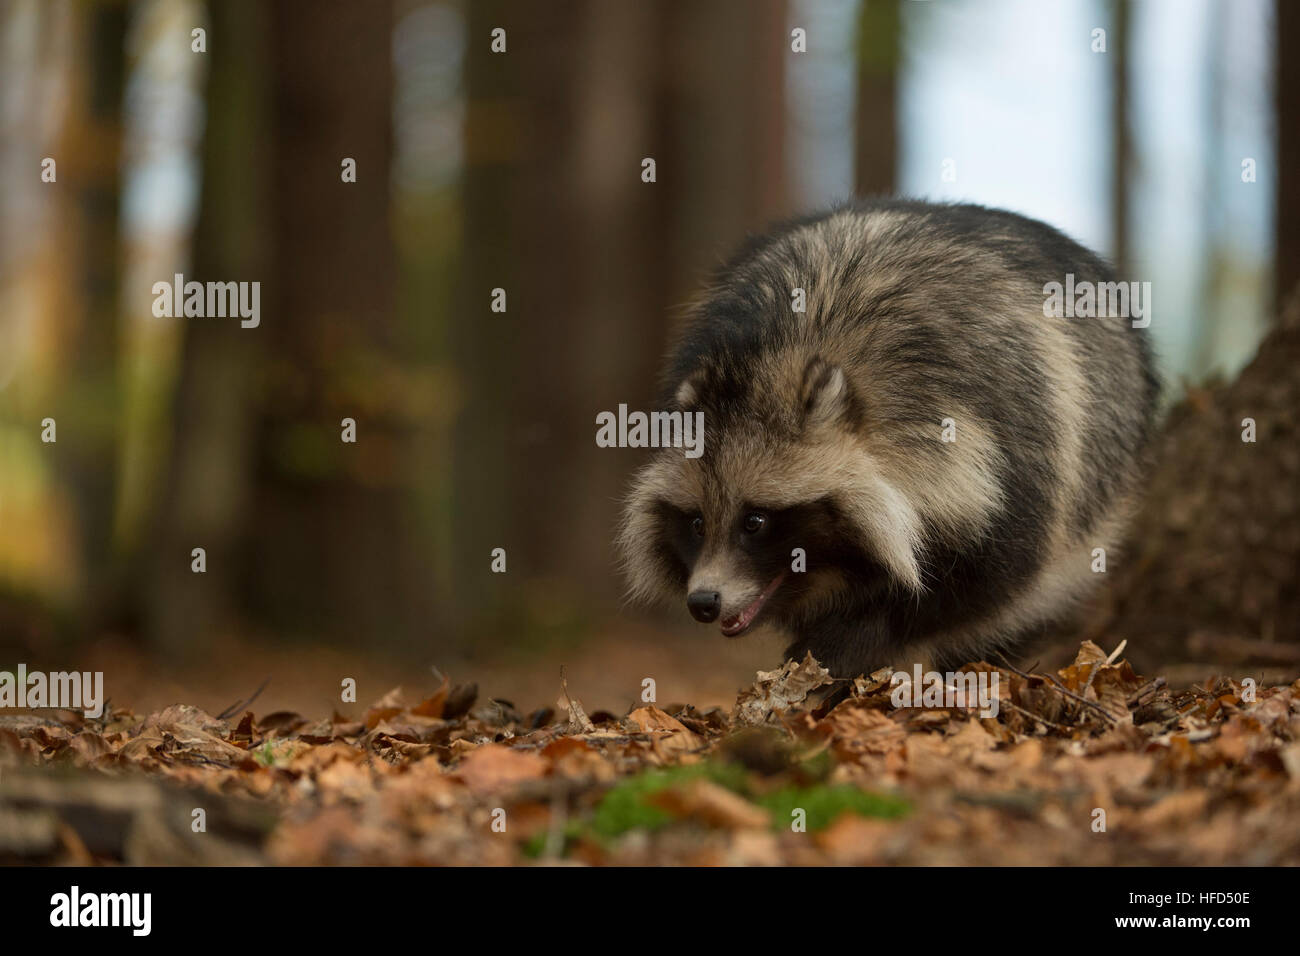 Raccoon dog / Marderhund ( Nyctereutes procyonoides ), invasive species, walking through a forest, with its nose on the ground. Stock Photo